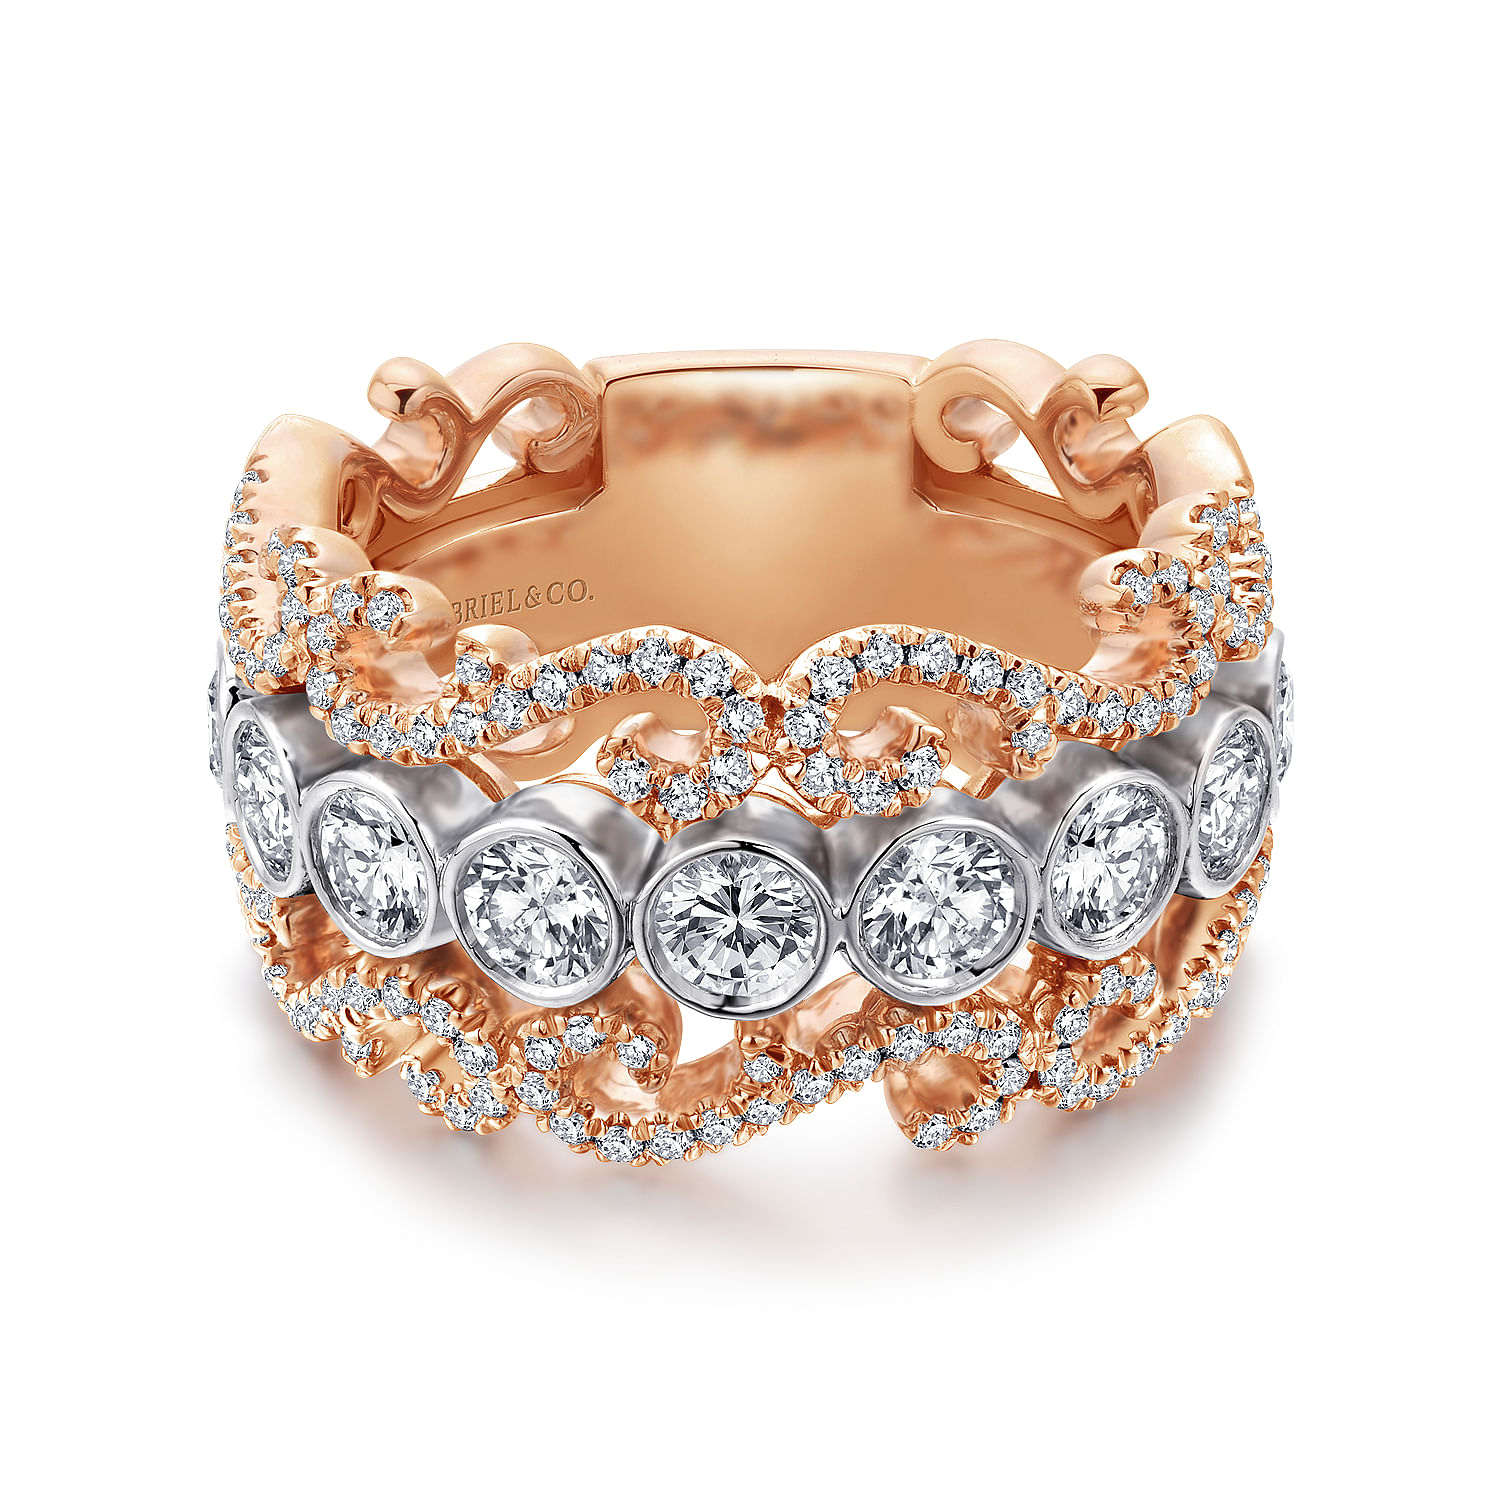 Abdie - Wide 14K White and Rose Gold Fancy Diamond Anniversary Band